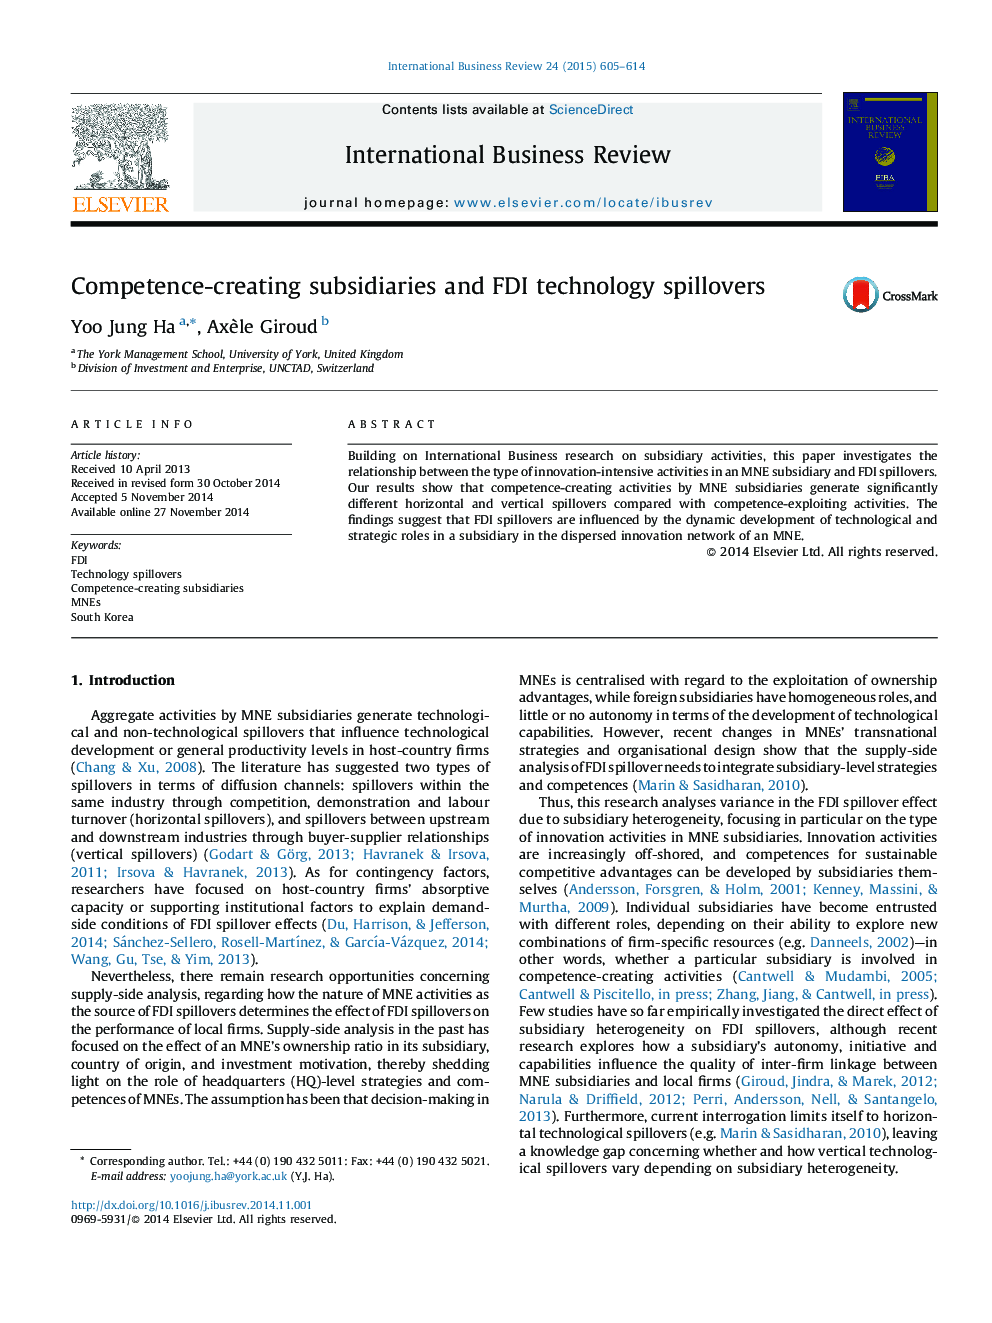 Competence-creating subsidiaries and FDI technology spillovers